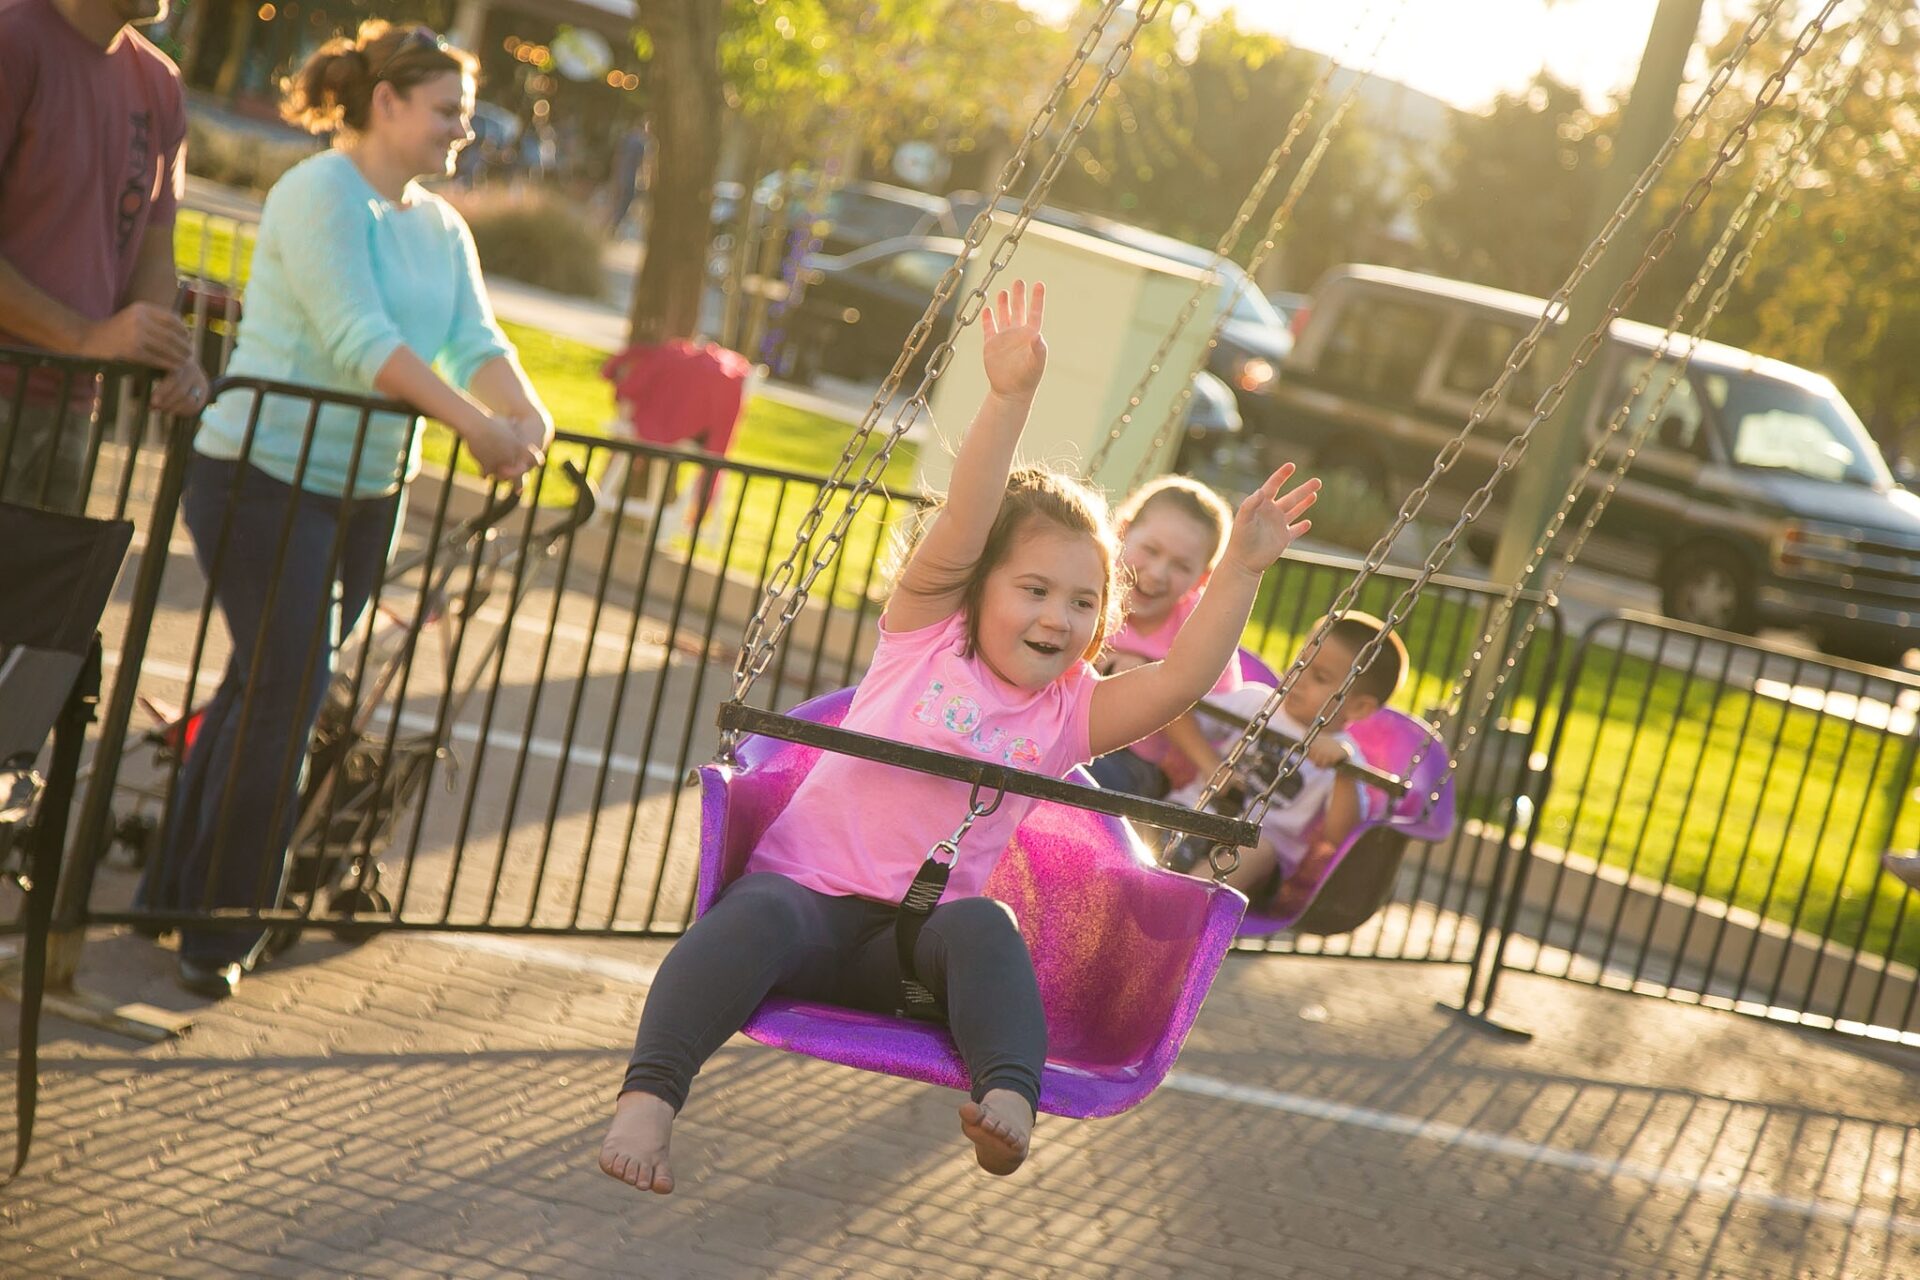 Kid Zone is only one of the attractions in the 10-hour long Rock the Block annual bash that celebrates Chandler's dynamic lifestyle and family-friendly atmosphere. 